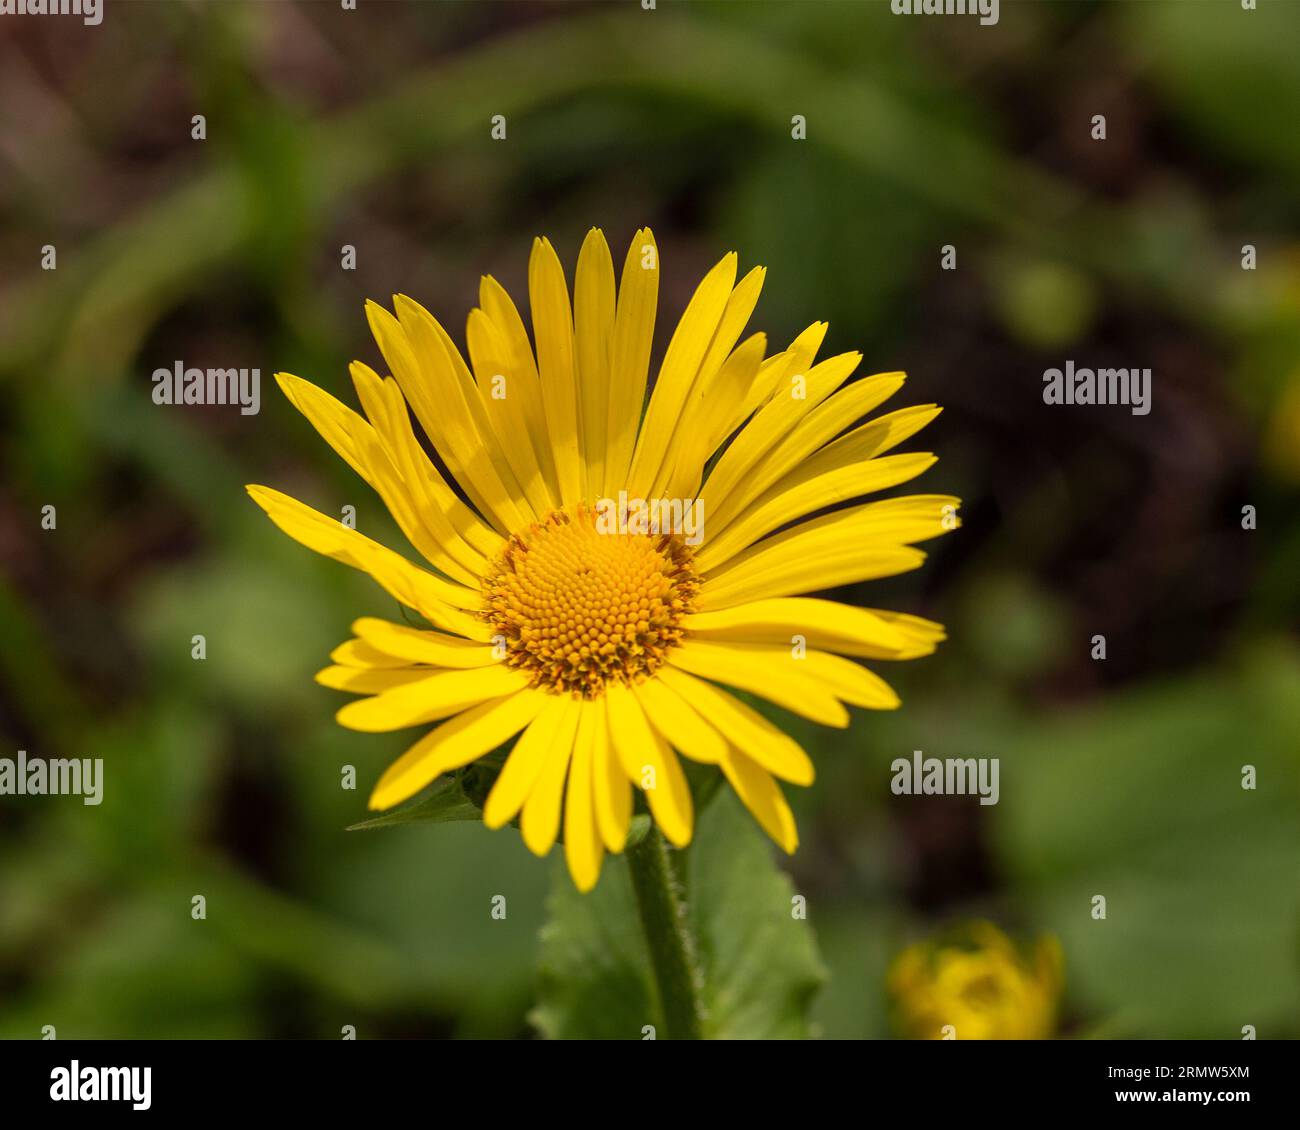 Great Leopard's Bane (Doronicum pardalianches); close-up of flower Stock Photo